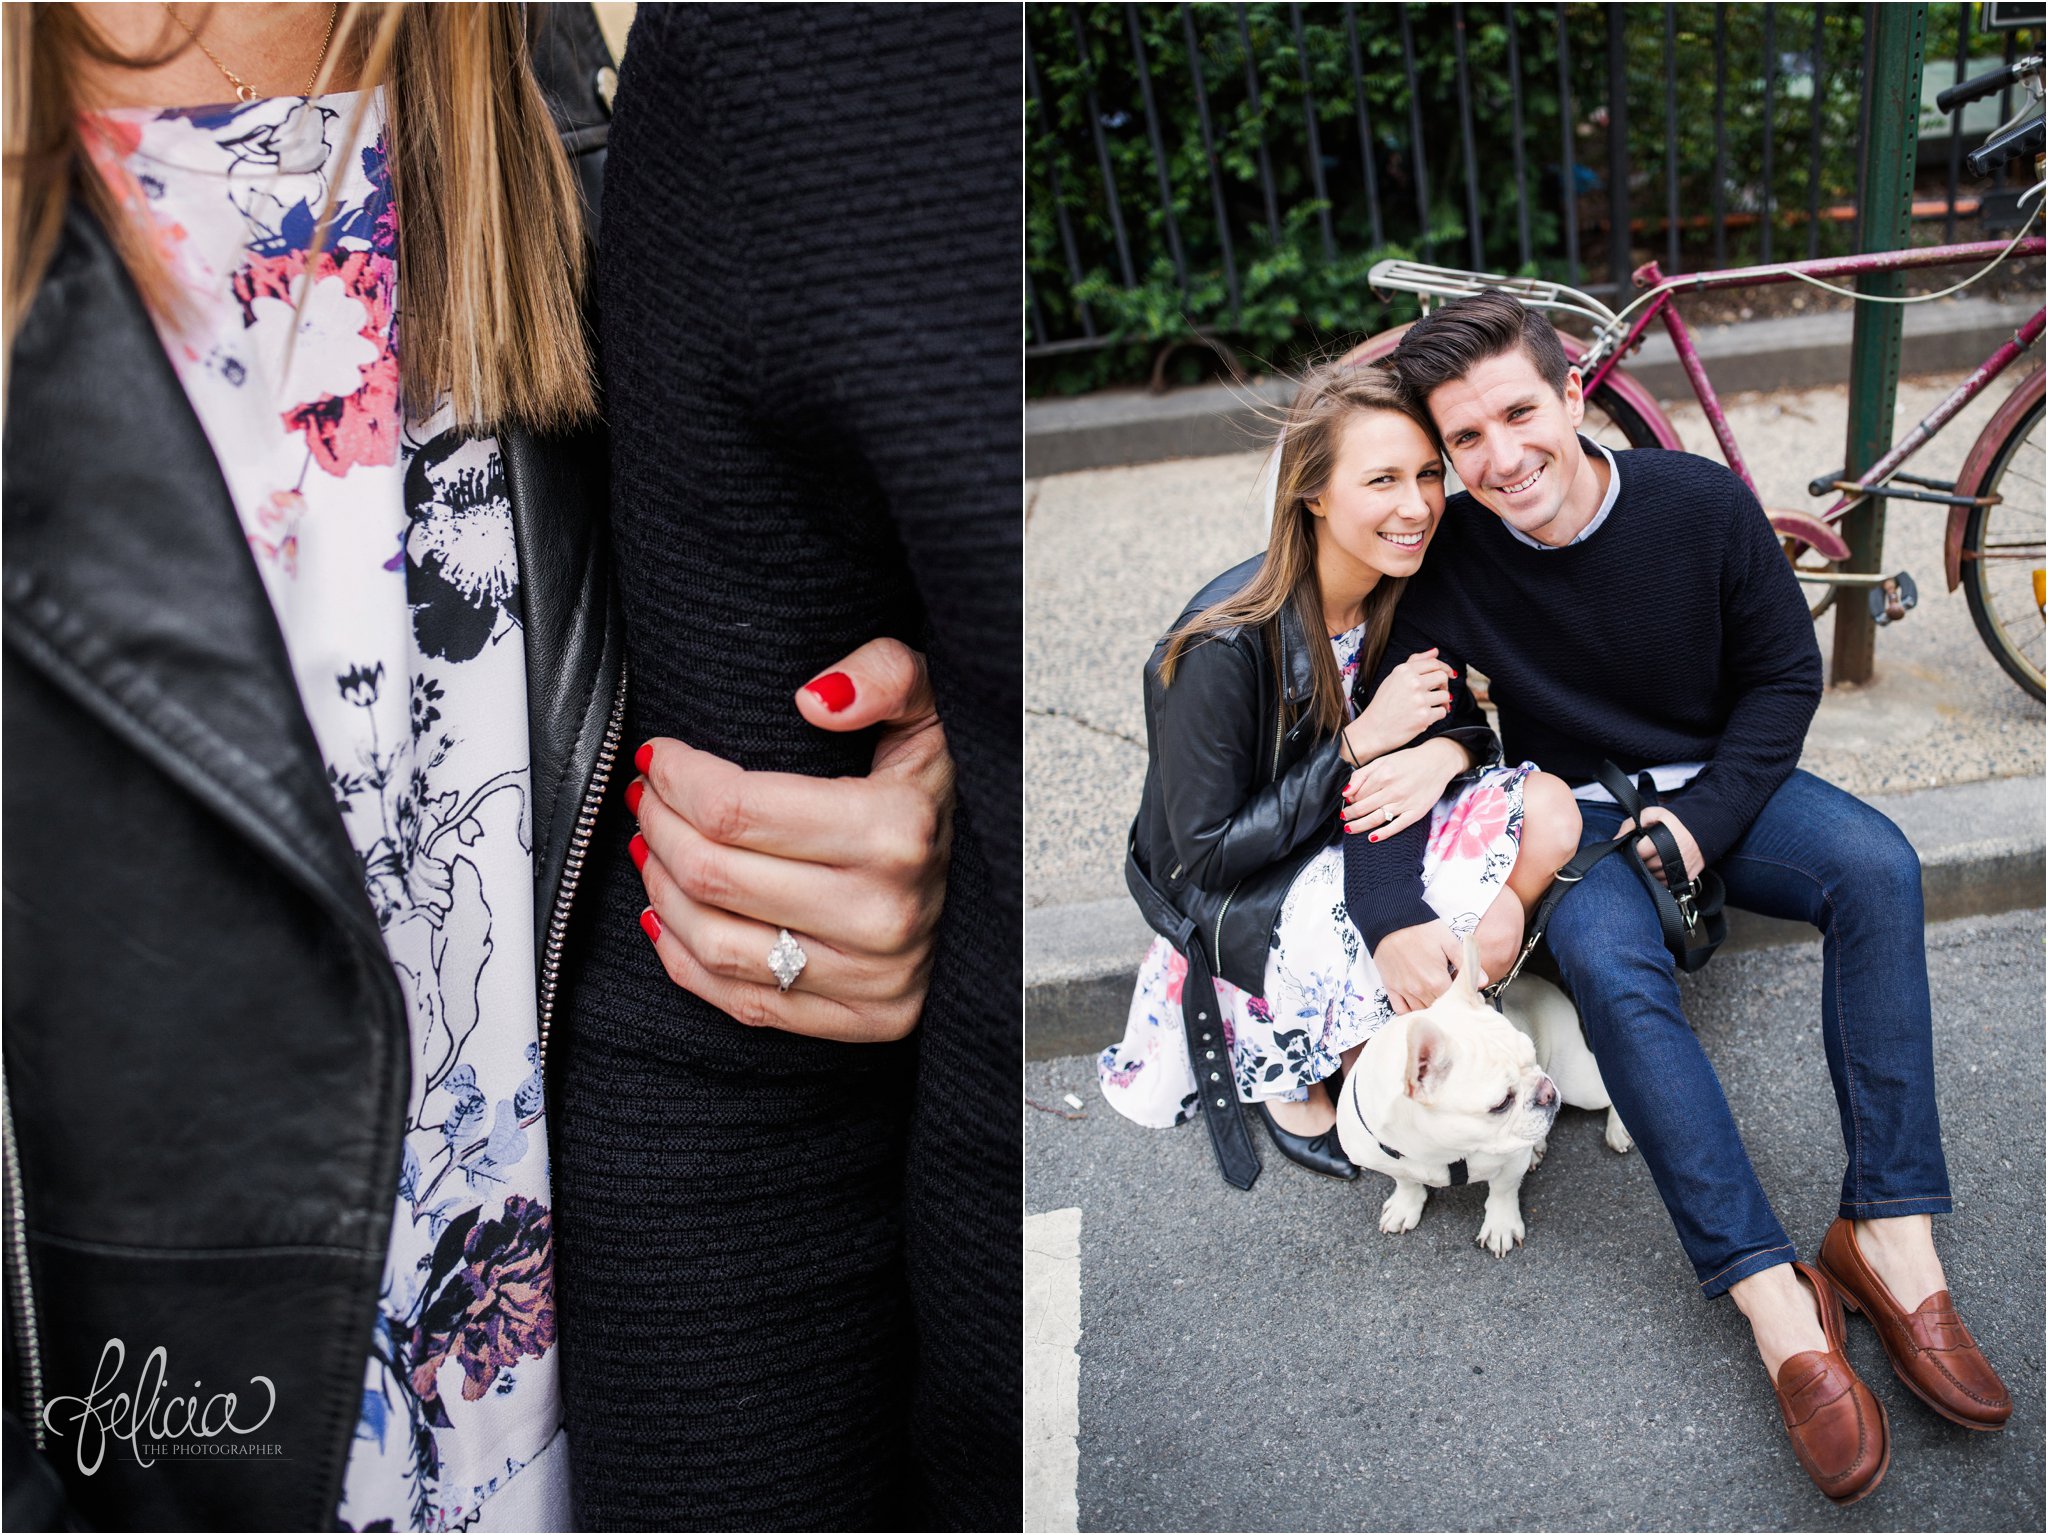 engagement ring | smiling bride and groom | close up | diamond ring | red fingernails with engagement ring | New York City Photography | wedding | New York City | West Village | New York City photography | wedding photography | images by feliciathephotographer.com | French Bulldog | engagement photos | engagement pictures with dog | engagement pictures in park | vintage bicycle | red bicycle 